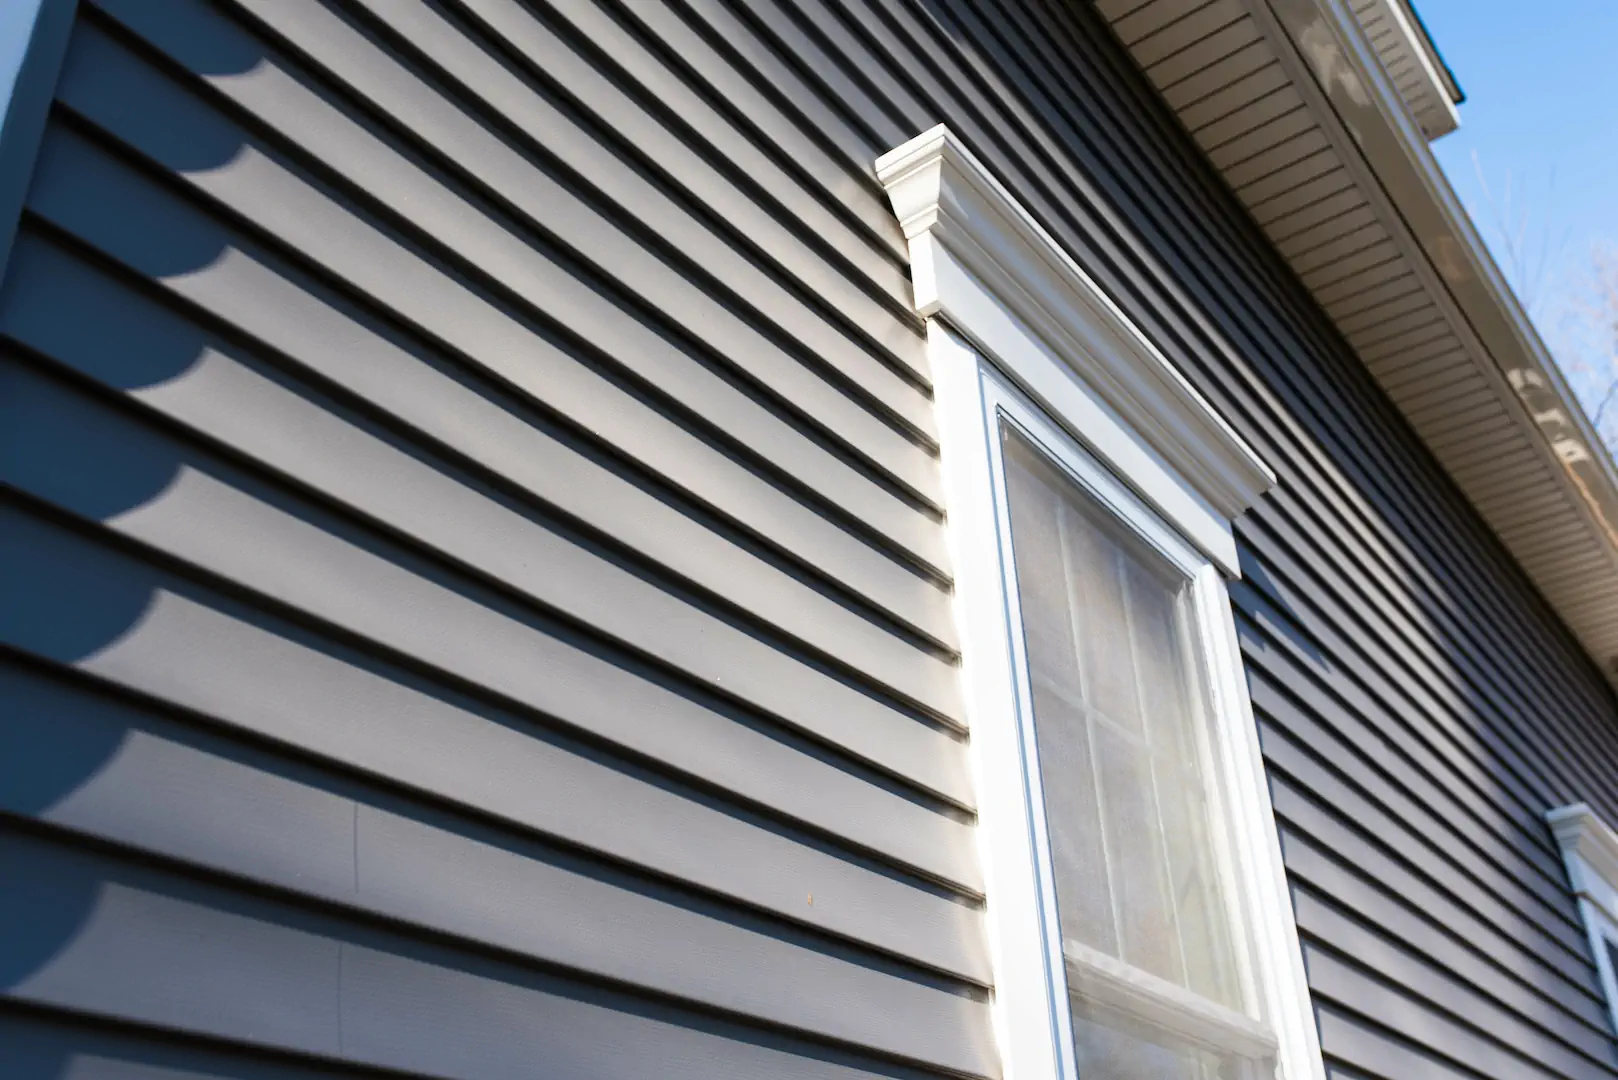 memphis siding services new siding replacement siding repair by river city pros